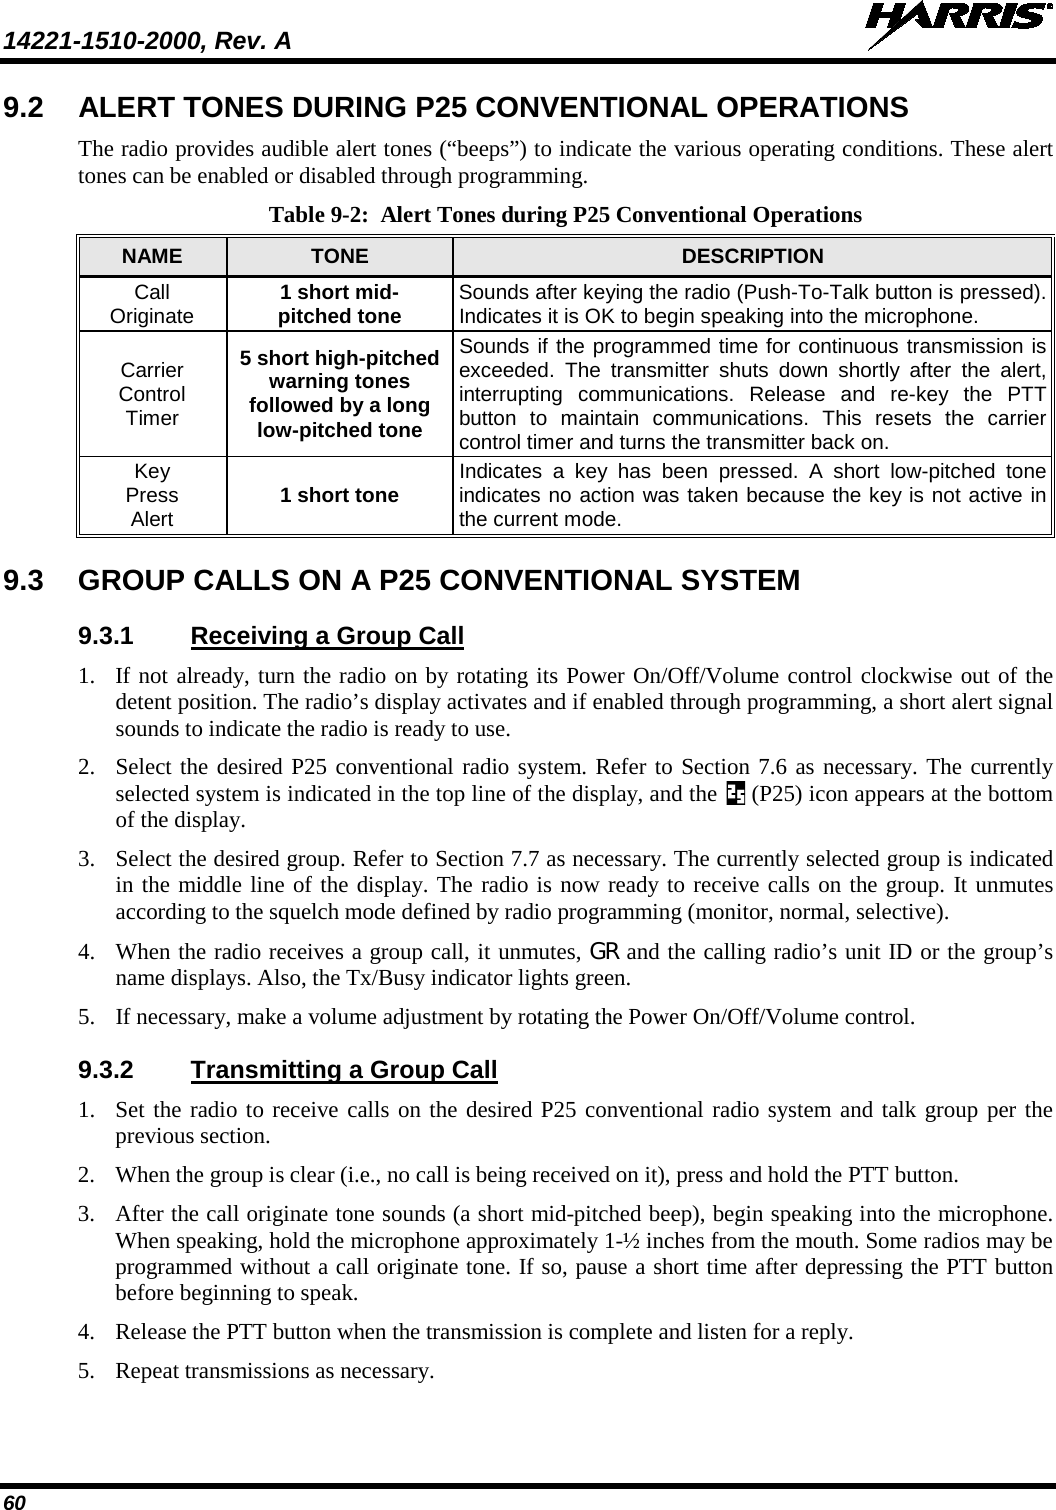 14221-1510-2000, Rev. A   60 9.2 ALERT TONES DURING P25 CONVENTIONAL OPERATIONS The radio provides audible alert tones (“beeps”) to indicate the various operating conditions. These alert tones can be enabled or disabled through programming. Table 9-2:  Alert Tones during P25 Conventional Operations NAME TONE DESCRIPTION Call Originate 1 short mid- pitched tone Sounds after keying the radio (Push-To-Talk button is pressed). Indicates it is OK to begin speaking into the microphone. Carrier Control Timer 5 short high-pitched warning tones followed by a long low-pitched tone Sounds if the programmed time for continuous transmission is exceeded. The transmitter shuts down shortly after the alert, interrupting  communications. Release and re-key the PTT button to maintain communications. This resets the carrier control timer and turns the transmitter back on. Key Press Alert 1 short tone Indicates a key has been pressed. A short low-pitched tone indicates no action was taken because the key is not active in the current mode. 9.3 GROUP CALLS ON A P25 CONVENTIONAL SYSTEM 9.3.1 Receiving a Group Call 1. If not already, turn the radio on by rotating its Power On/Off/Volume control clockwise out of the detent position. The radio’s display activates and if enabled through programming, a short alert signal sounds to indicate the radio is ready to use. 2. Select the desired P25 conventional radio system. Refer to Section 7.6 as necessary. The currently selected system is indicated in the top line of the display, and the   (P25) icon appears at the bottom of the display. 3. Select the desired group. Refer to Section 7.7 as necessary. The currently selected group is indicated in the middle line of the display. The radio is now ready to receive calls on the group. It unmutes according to the squelch mode defined by radio programming (monitor, normal, selective). 4. When the radio receives a group call, it unmutes, GR and the calling radio’s unit ID or the group’s name displays. Also, the Tx/Busy indicator lights green. 5. If necessary, make a volume adjustment by rotating the Power On/Off/Volume control. 9.3.2 Transmitting a Group Call 1. Set the radio to receive calls on the desired P25 conventional radio system and talk group per the previous section. 2. When the group is clear (i.e., no call is being received on it), press and hold the PTT button. 3. After the call originate tone sounds (a short mid-pitched beep), begin speaking into the microphone. When speaking, hold the microphone approximately 1-½ inches from the mouth. Some radios may be programmed without a call originate tone. If so, pause a short time after depressing the PTT button before beginning to speak. 4. Release the PTT button when the transmission is complete and listen for a reply. 5. Repeat transmissions as necessary. 